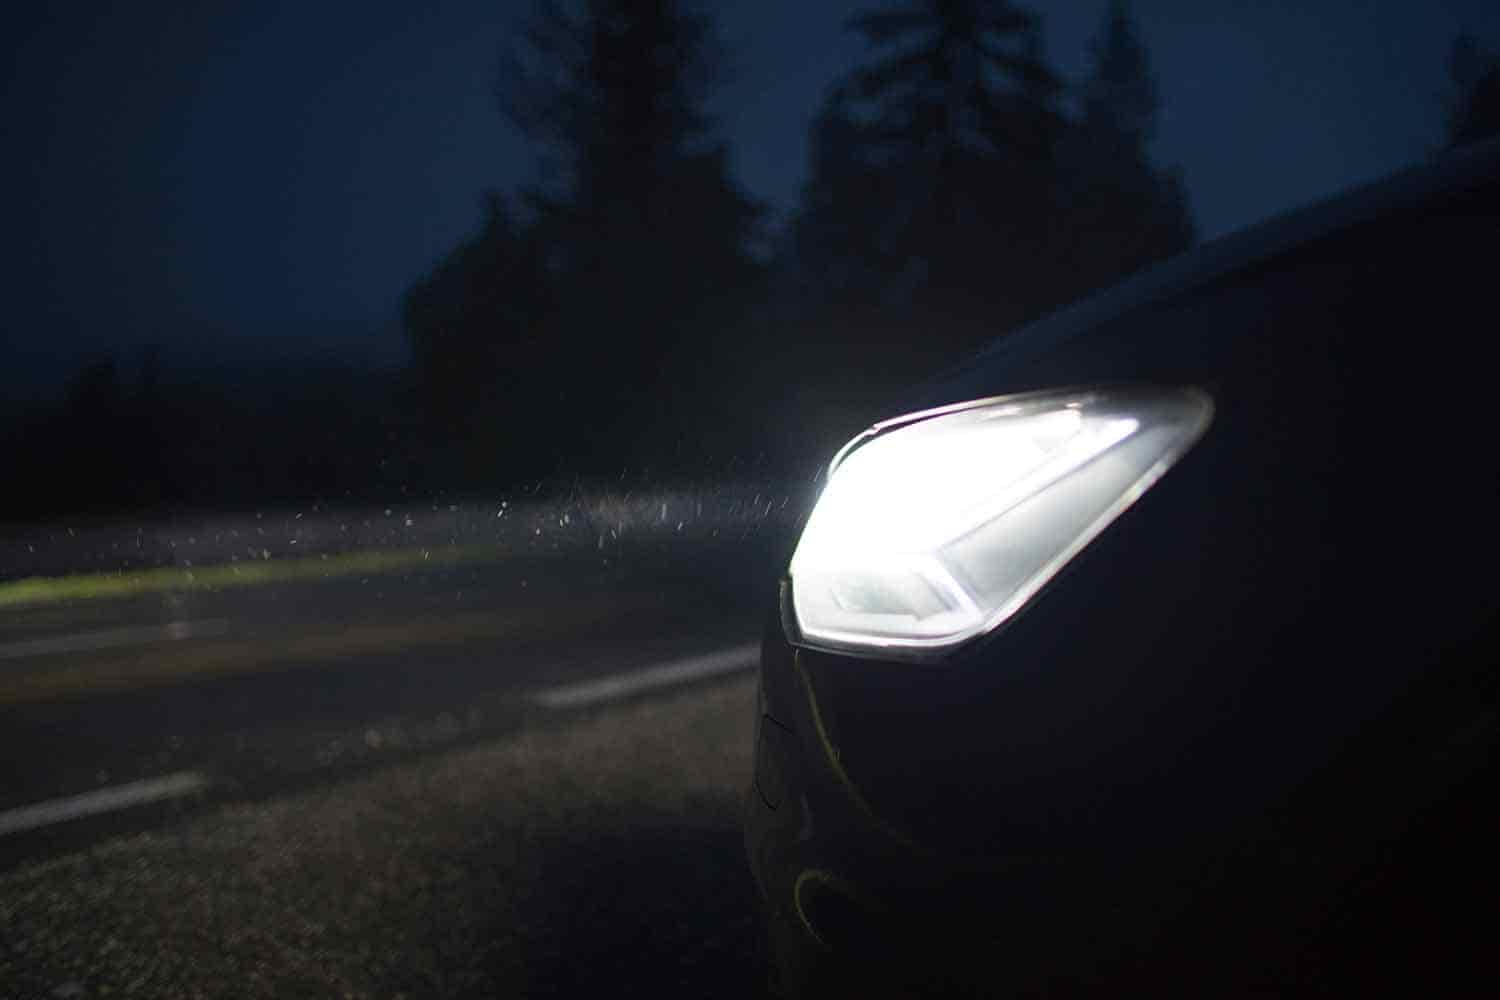 Is it bad to leave headlights on when car is off?